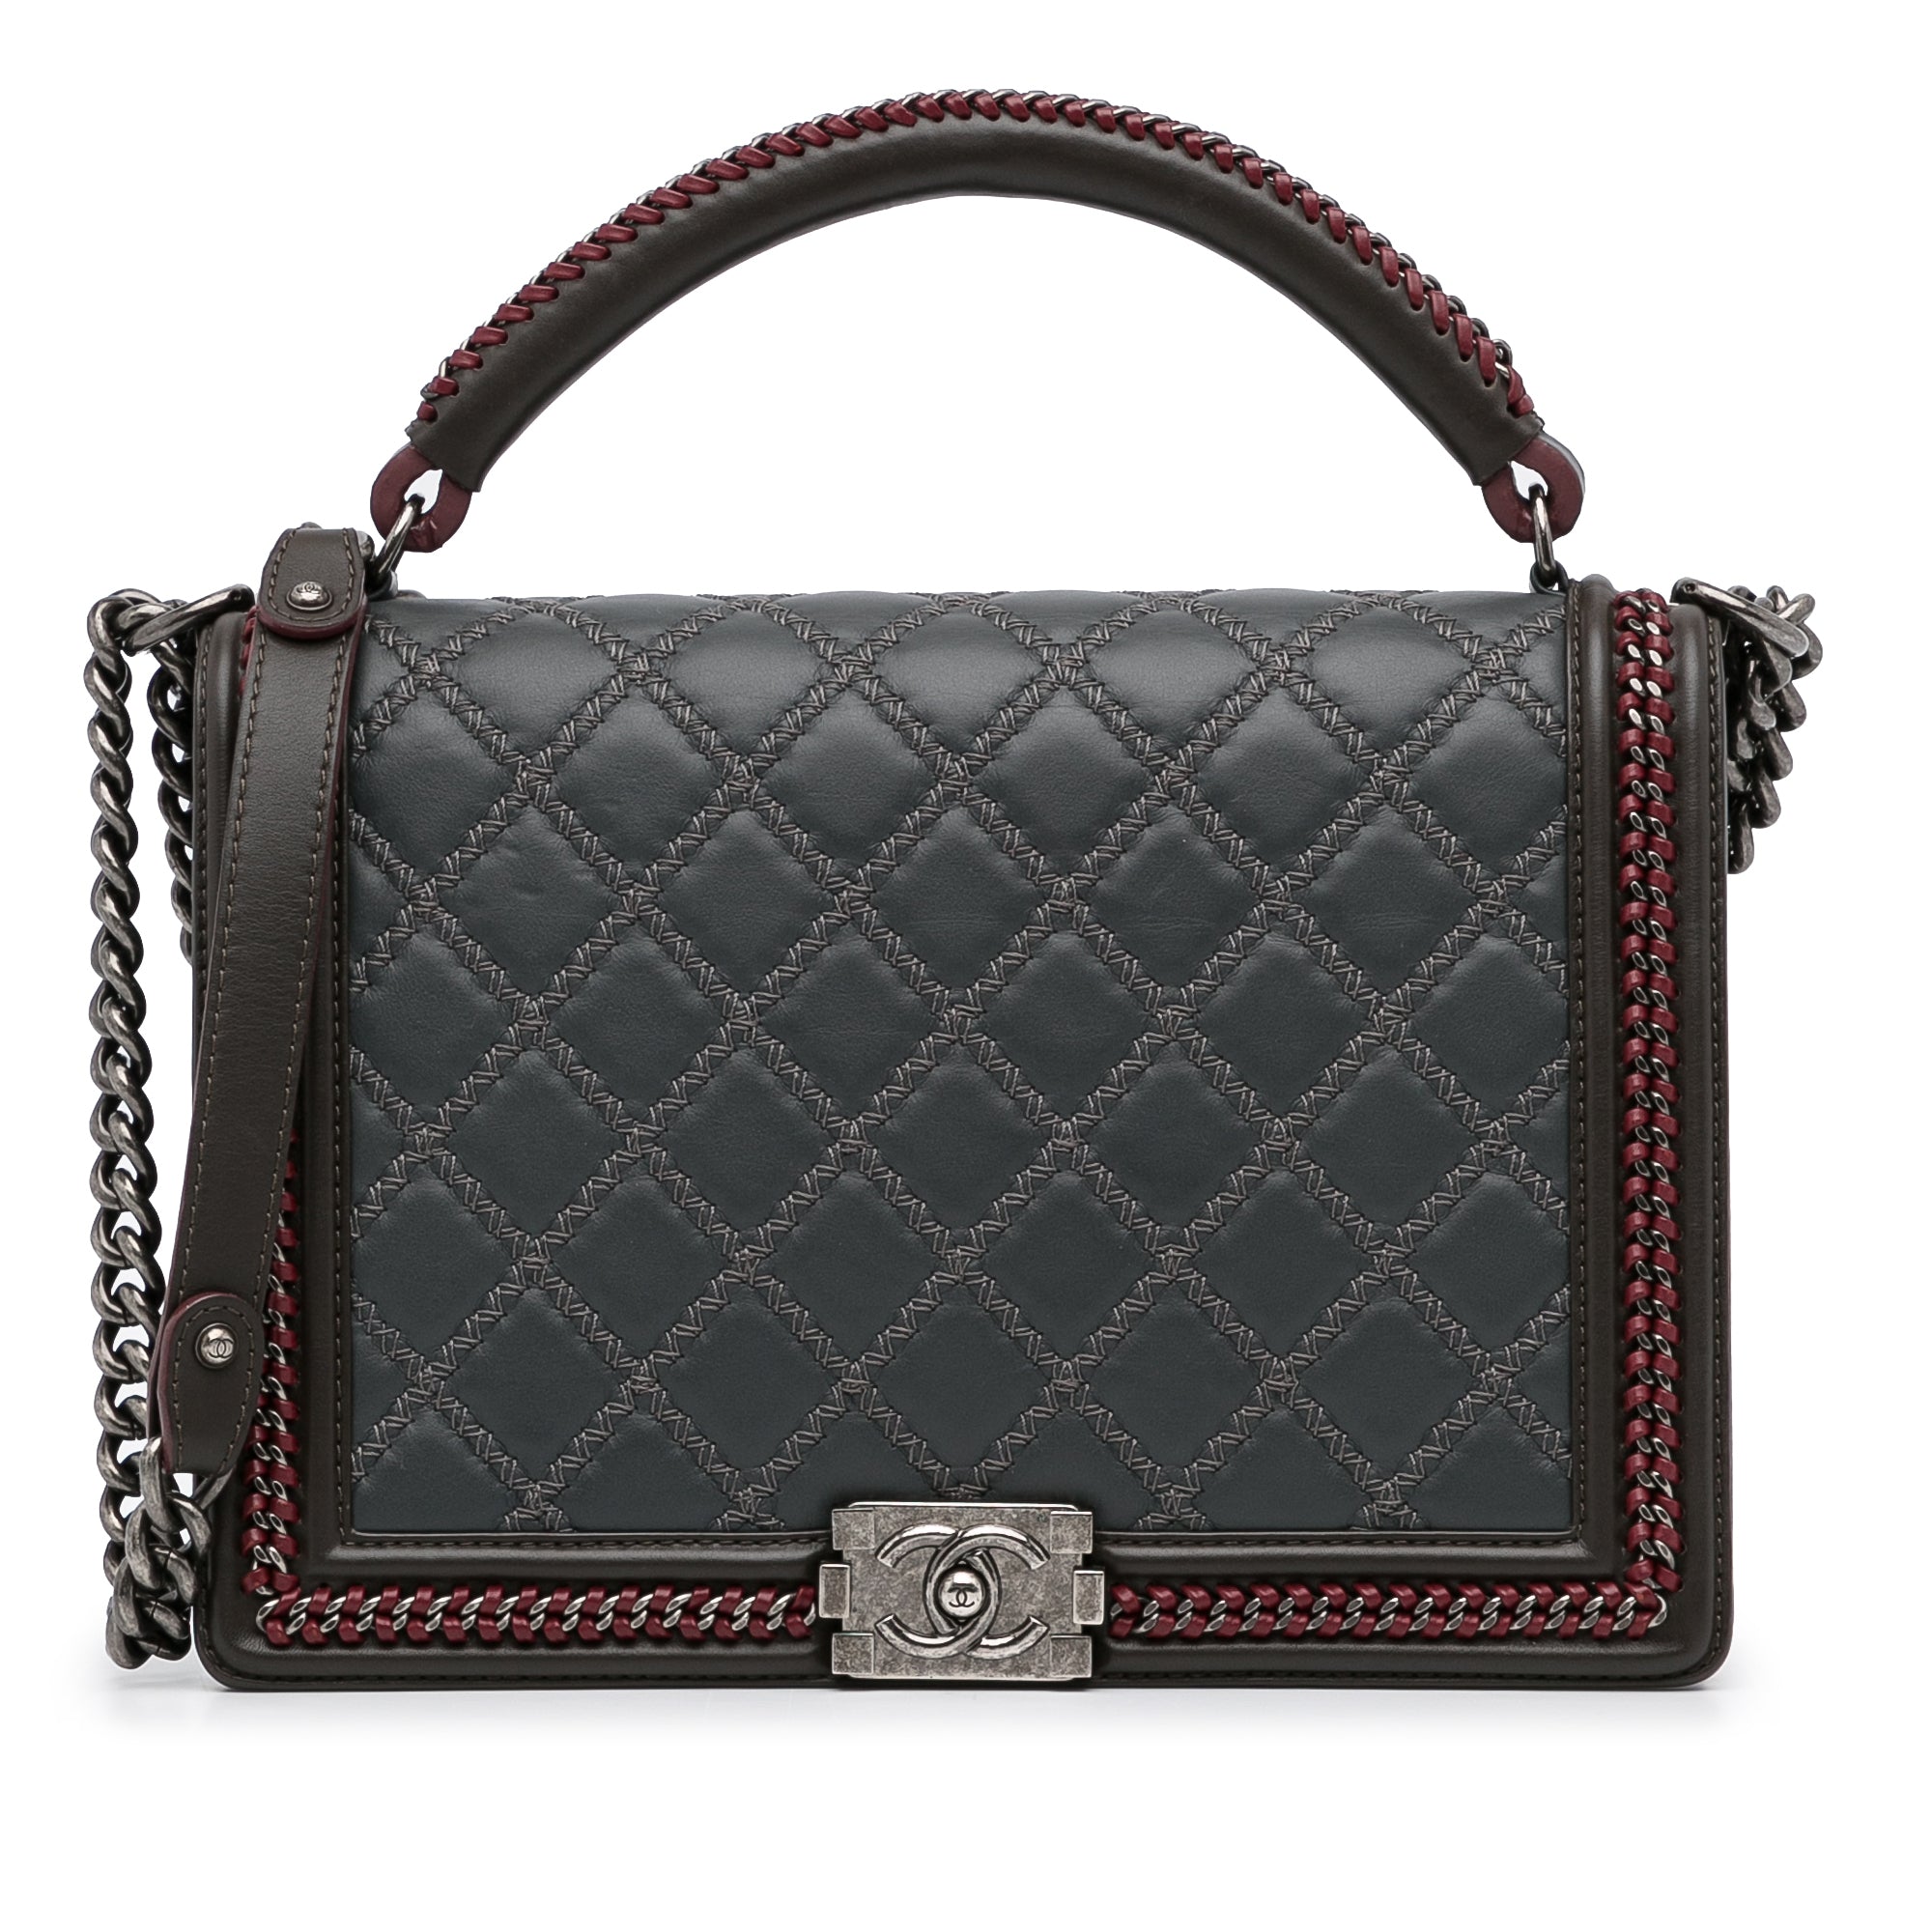 My Top 3 Favorite Chanel Bags, Gallery posted by Elyse Aiyana